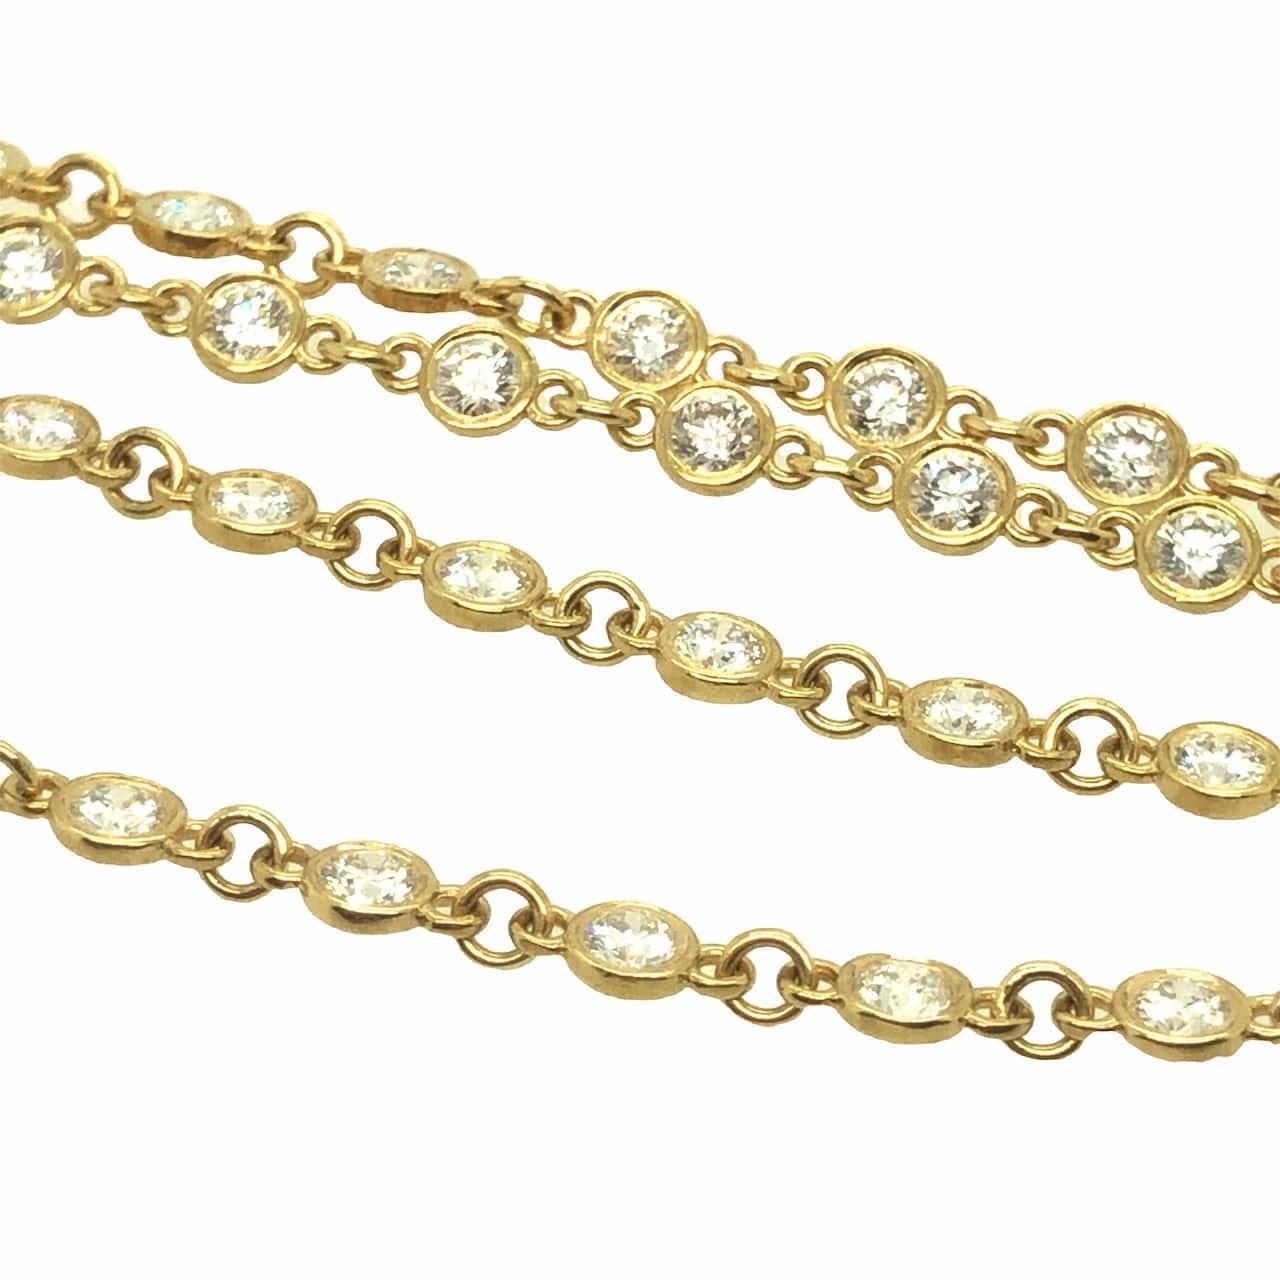 Bezel set diamond link necklace features 60 round brilliant cut diamonds, total weight of 3.25 carats, F-G VS quality.  It is handcrafted in 18K yellow gold. The chain has smooth movement and will beautifully drape on your neck. It measures 16